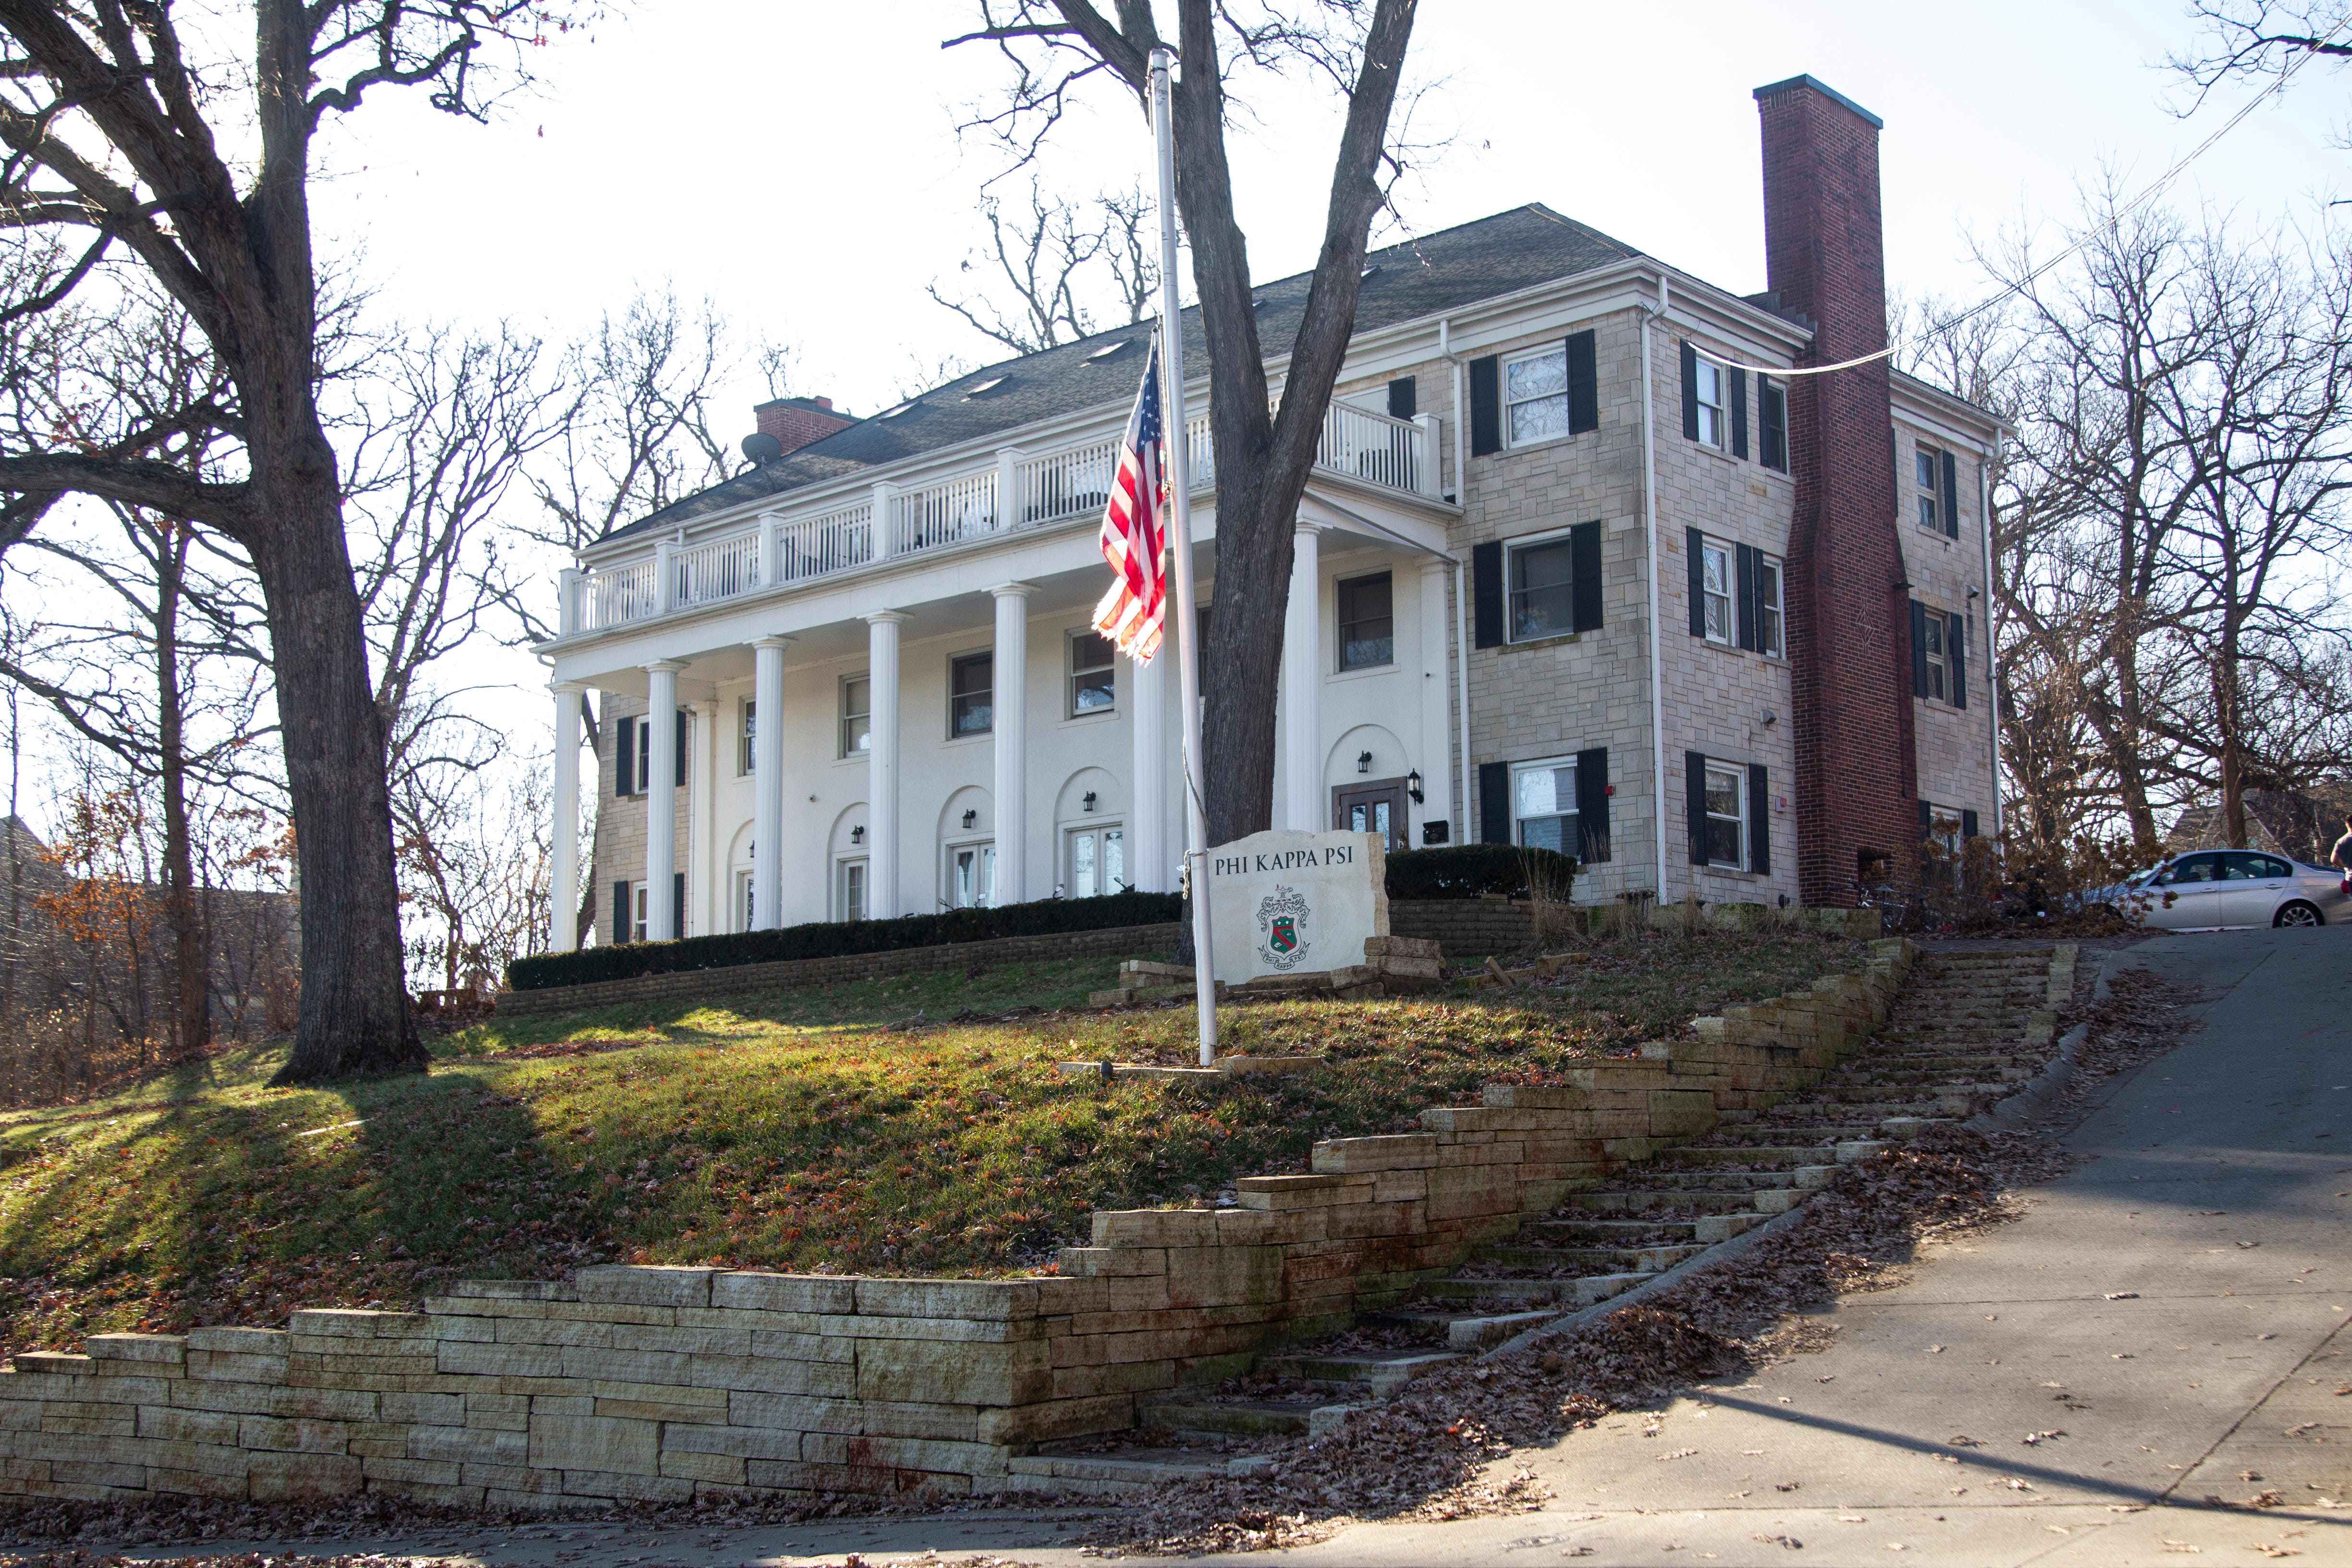 3 UI fraternities investigation, Phi Kappa Psi suspended temporarily